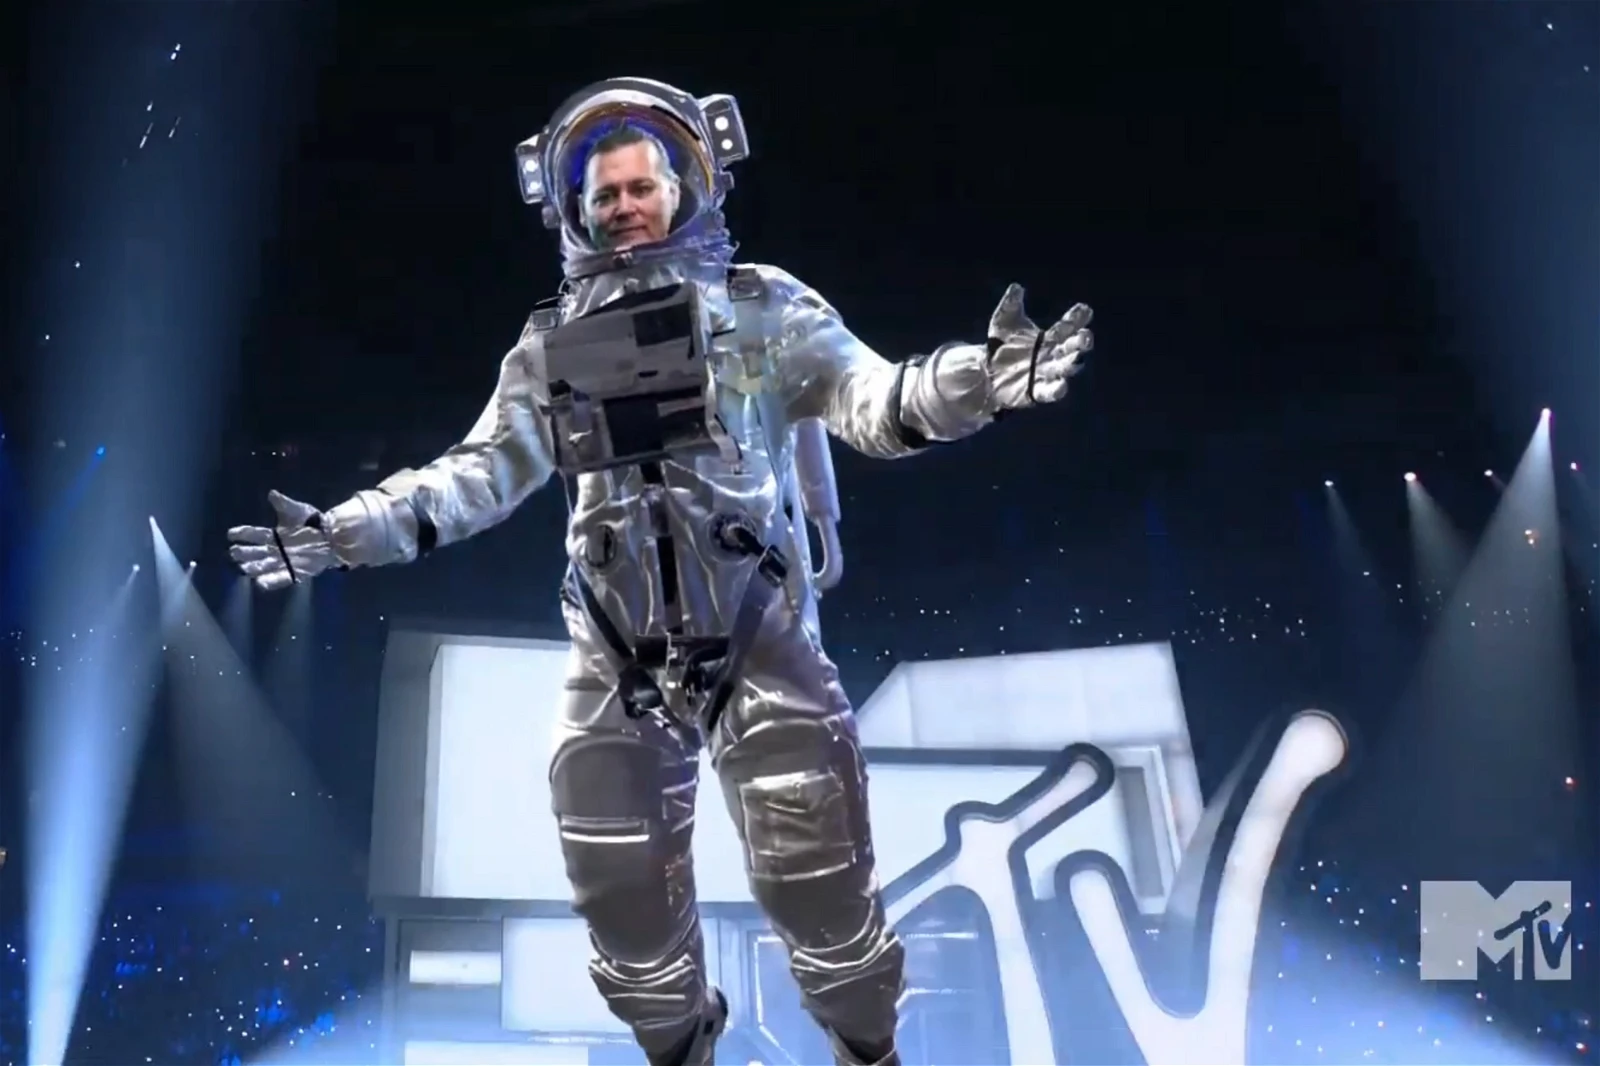 Johnny Depp's most recent appearance in the spacesuit at the MTV's awards.